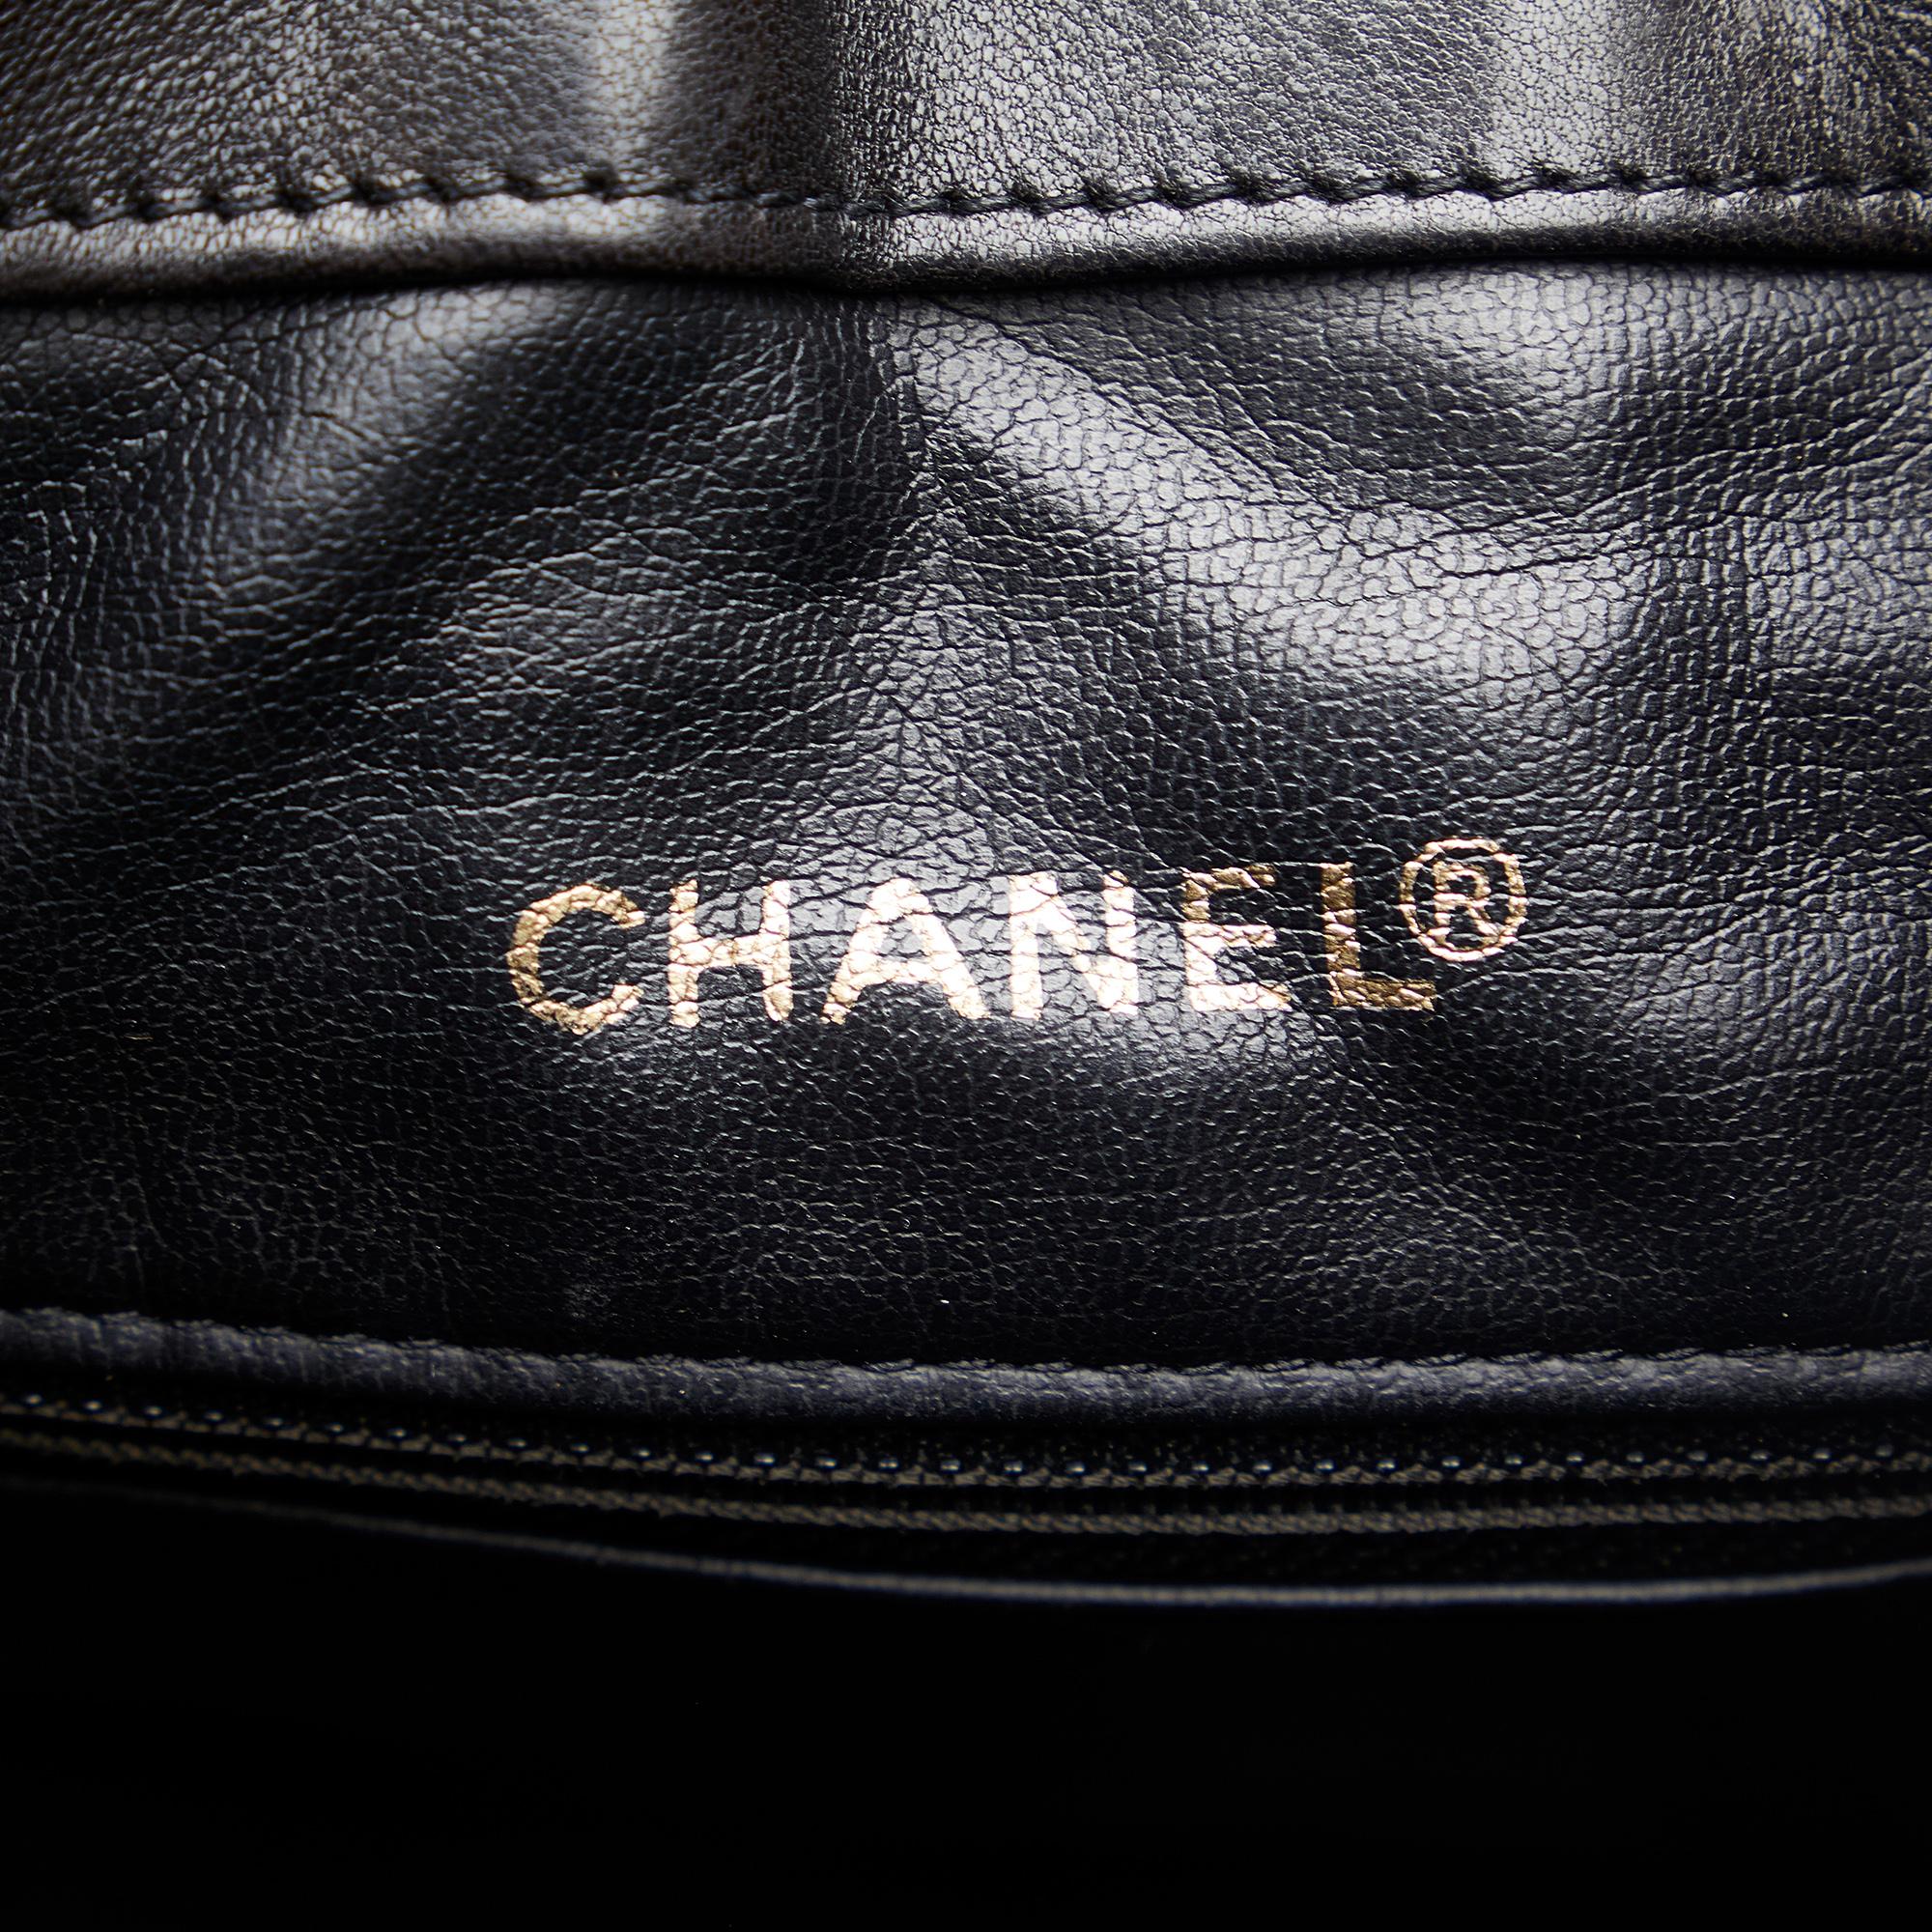 Chanel Black CC Quilted Lambskin Drawstring Backpack